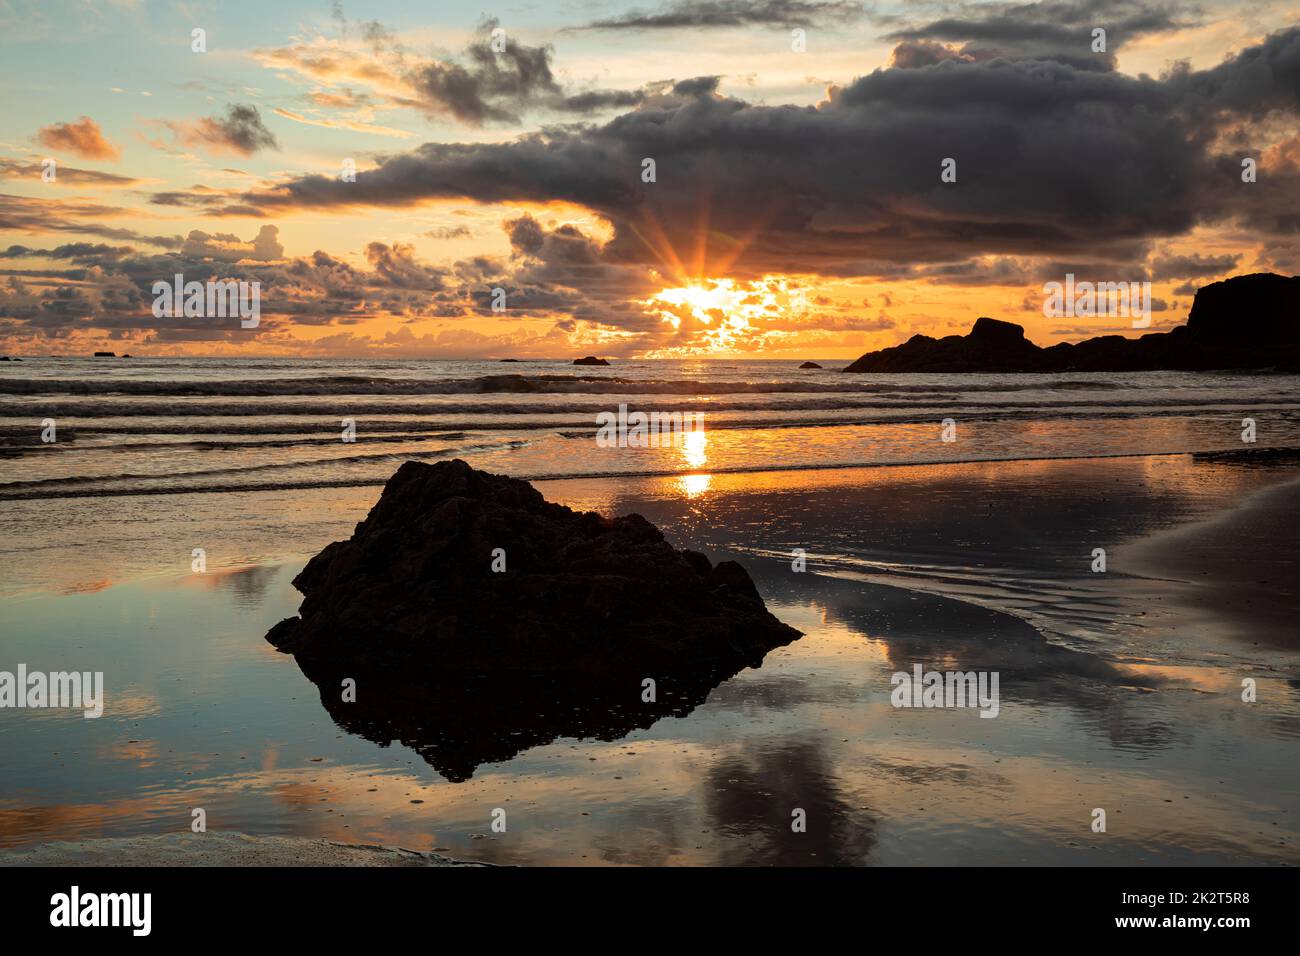 WA22050-00...WASHINGTON - The Pacific Ocean at sunset from Ruby Beach in Olympic National Park. Stock Photo